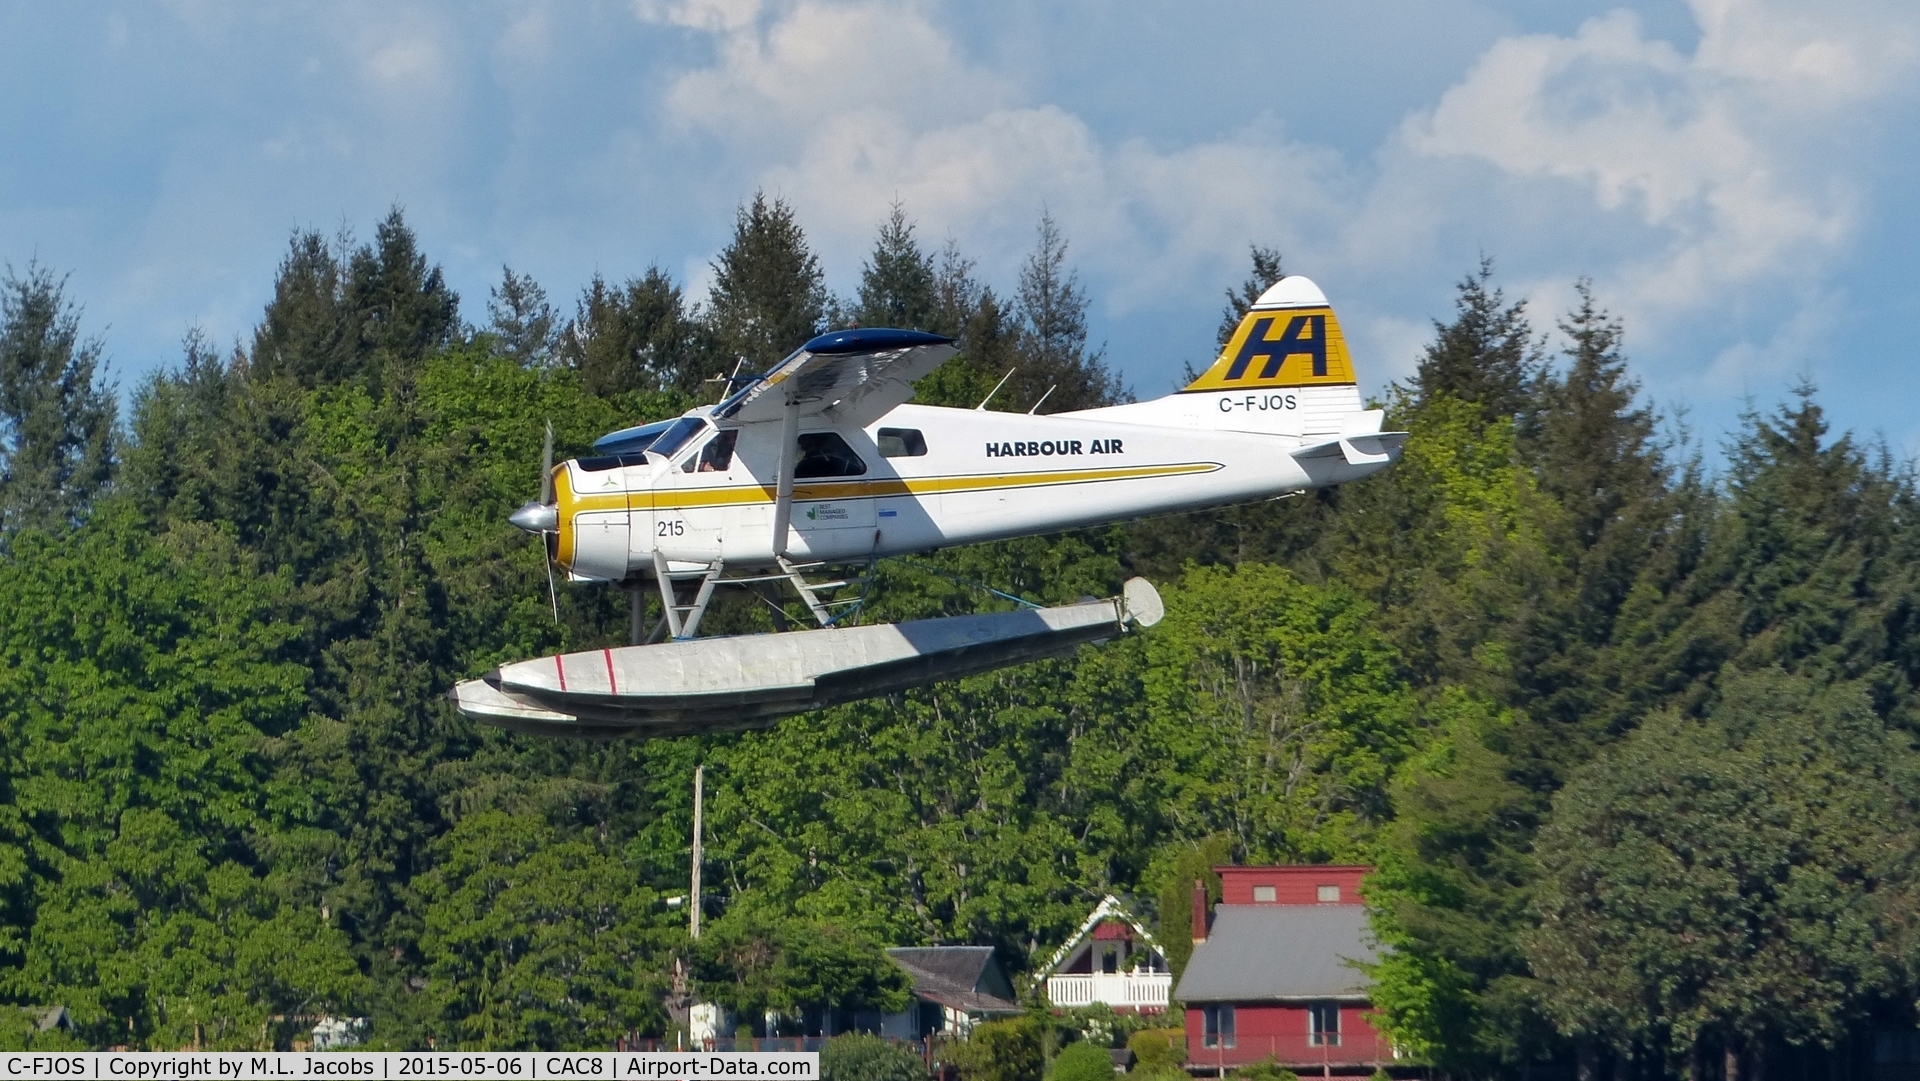 C-FJOS, 1956 De Havilland Canada DHC-2 Beaver Mk.1 C/N 1030, Harbour Air #215 coming in to land in Nanaimo Harbour.